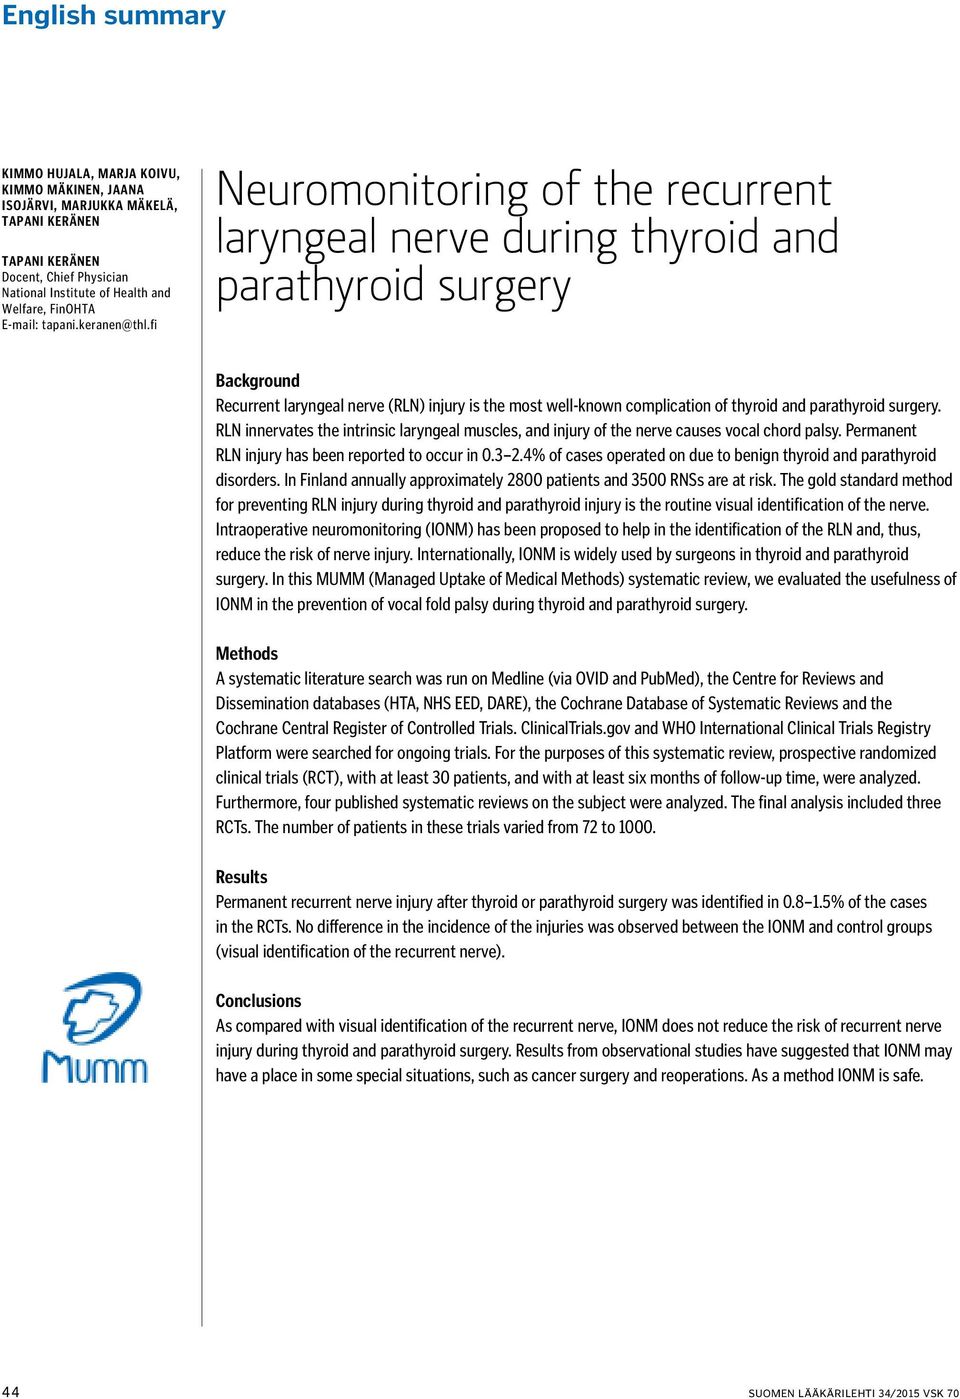 fi Neuromonitoring of the recurrent laryngeal nerve during thyroid and parathyroid surgery Background Recurrent laryngeal nerve (RLN) injury is the most well-known complication of thyroid and